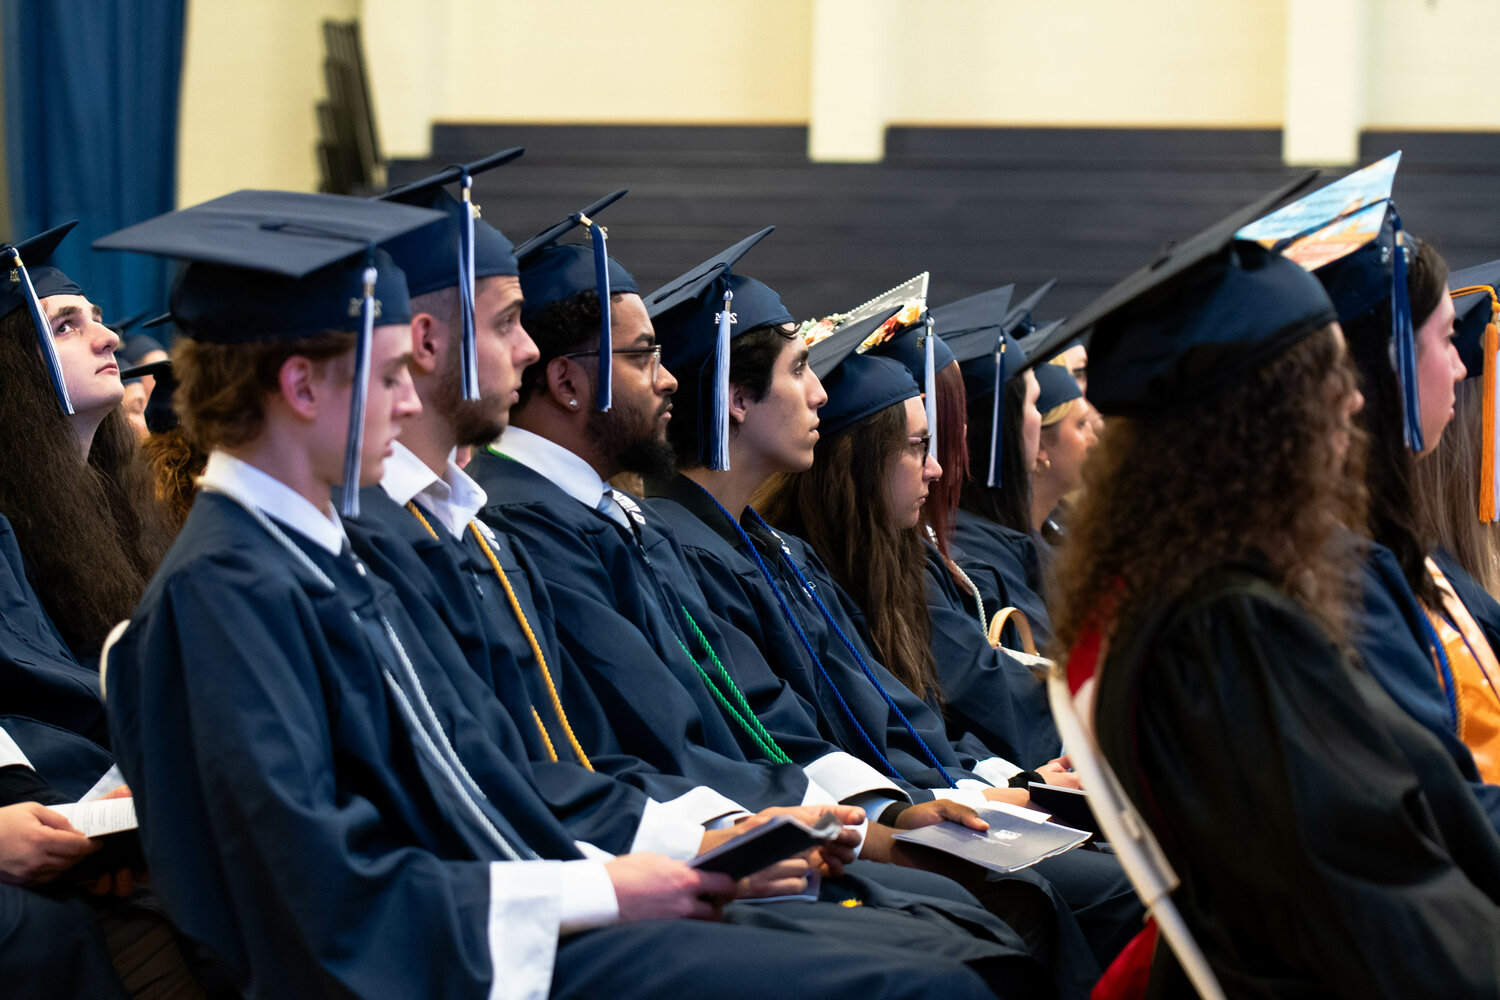 Graduates listen during their commencement ceremony at Bucks County Community College on May 16.